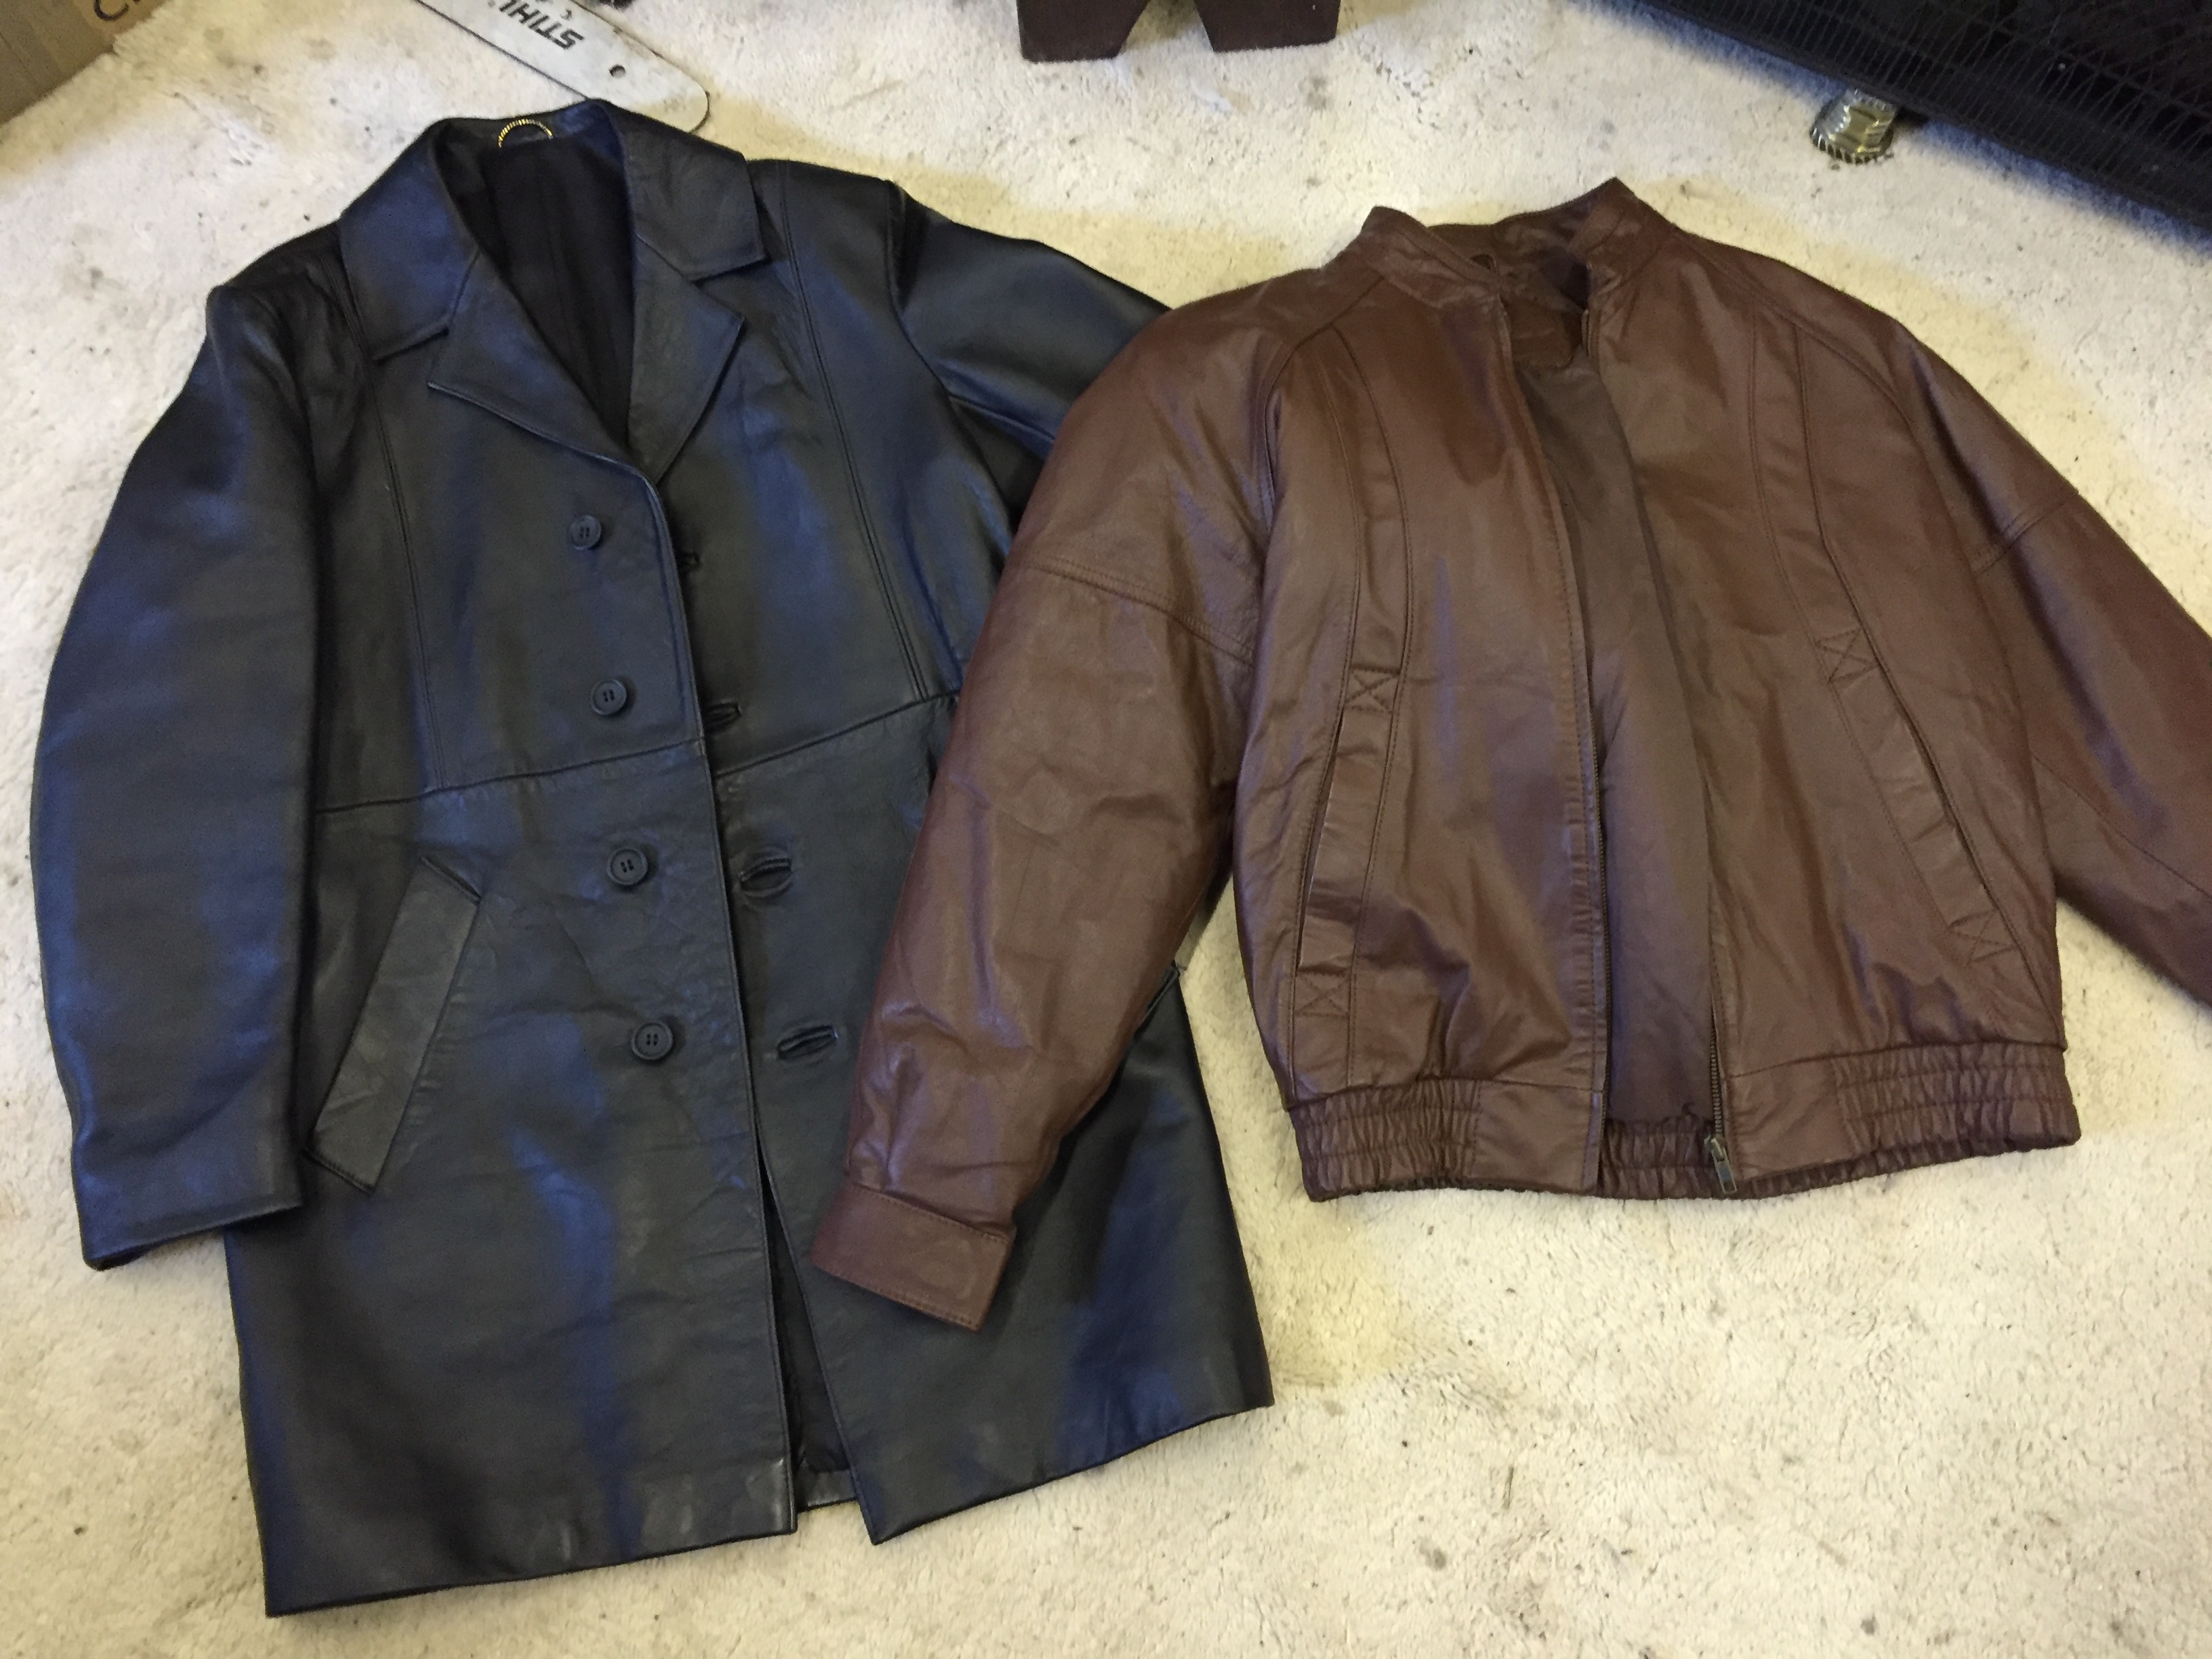 A bomber style brown leather jacket small and a black leather coat S 38.